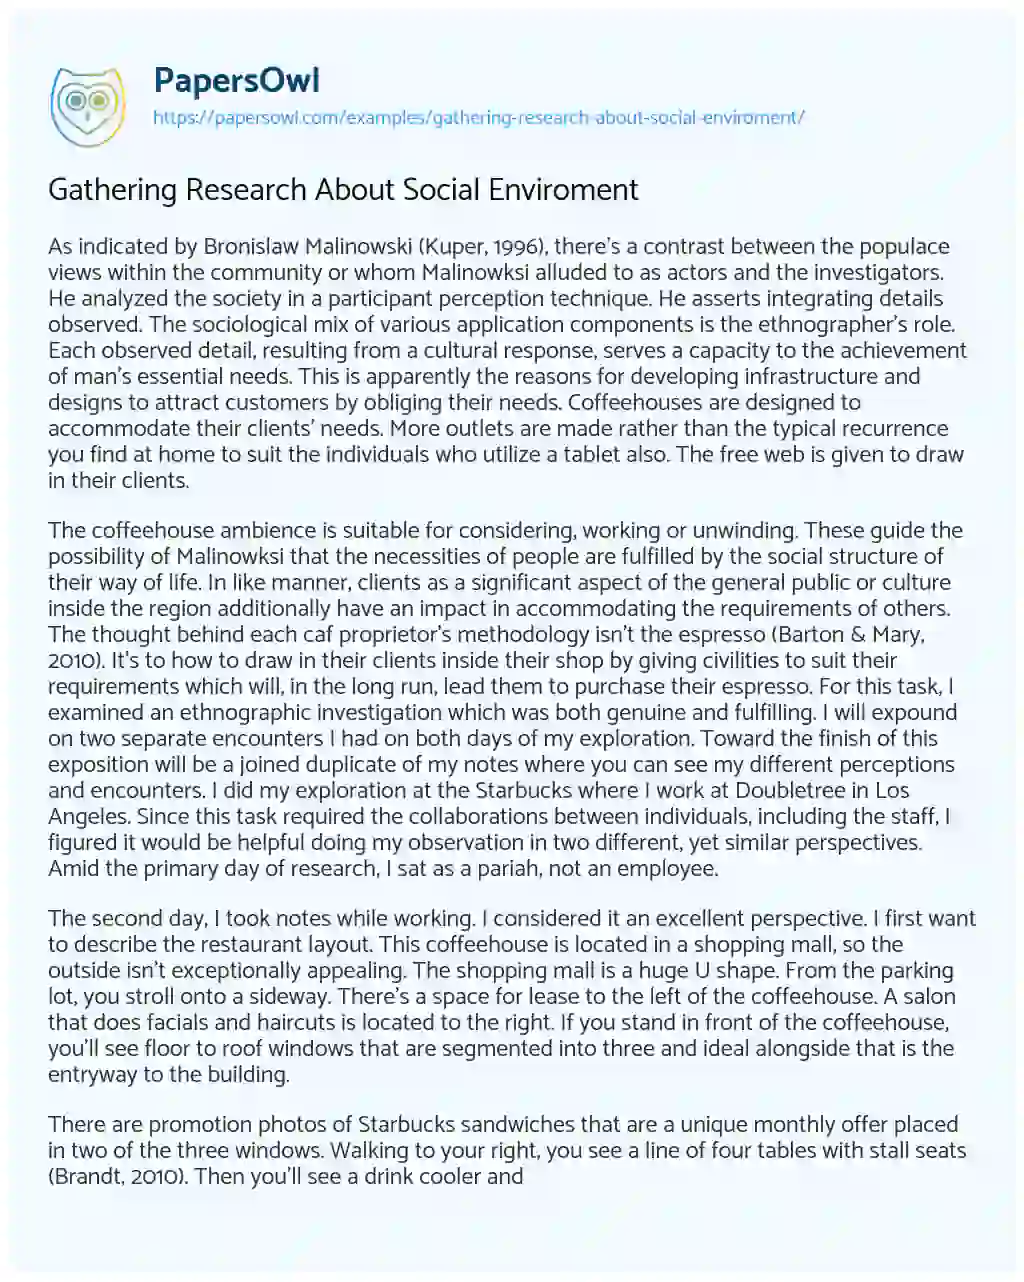 Essay on Gathering Research about Social Enviroment